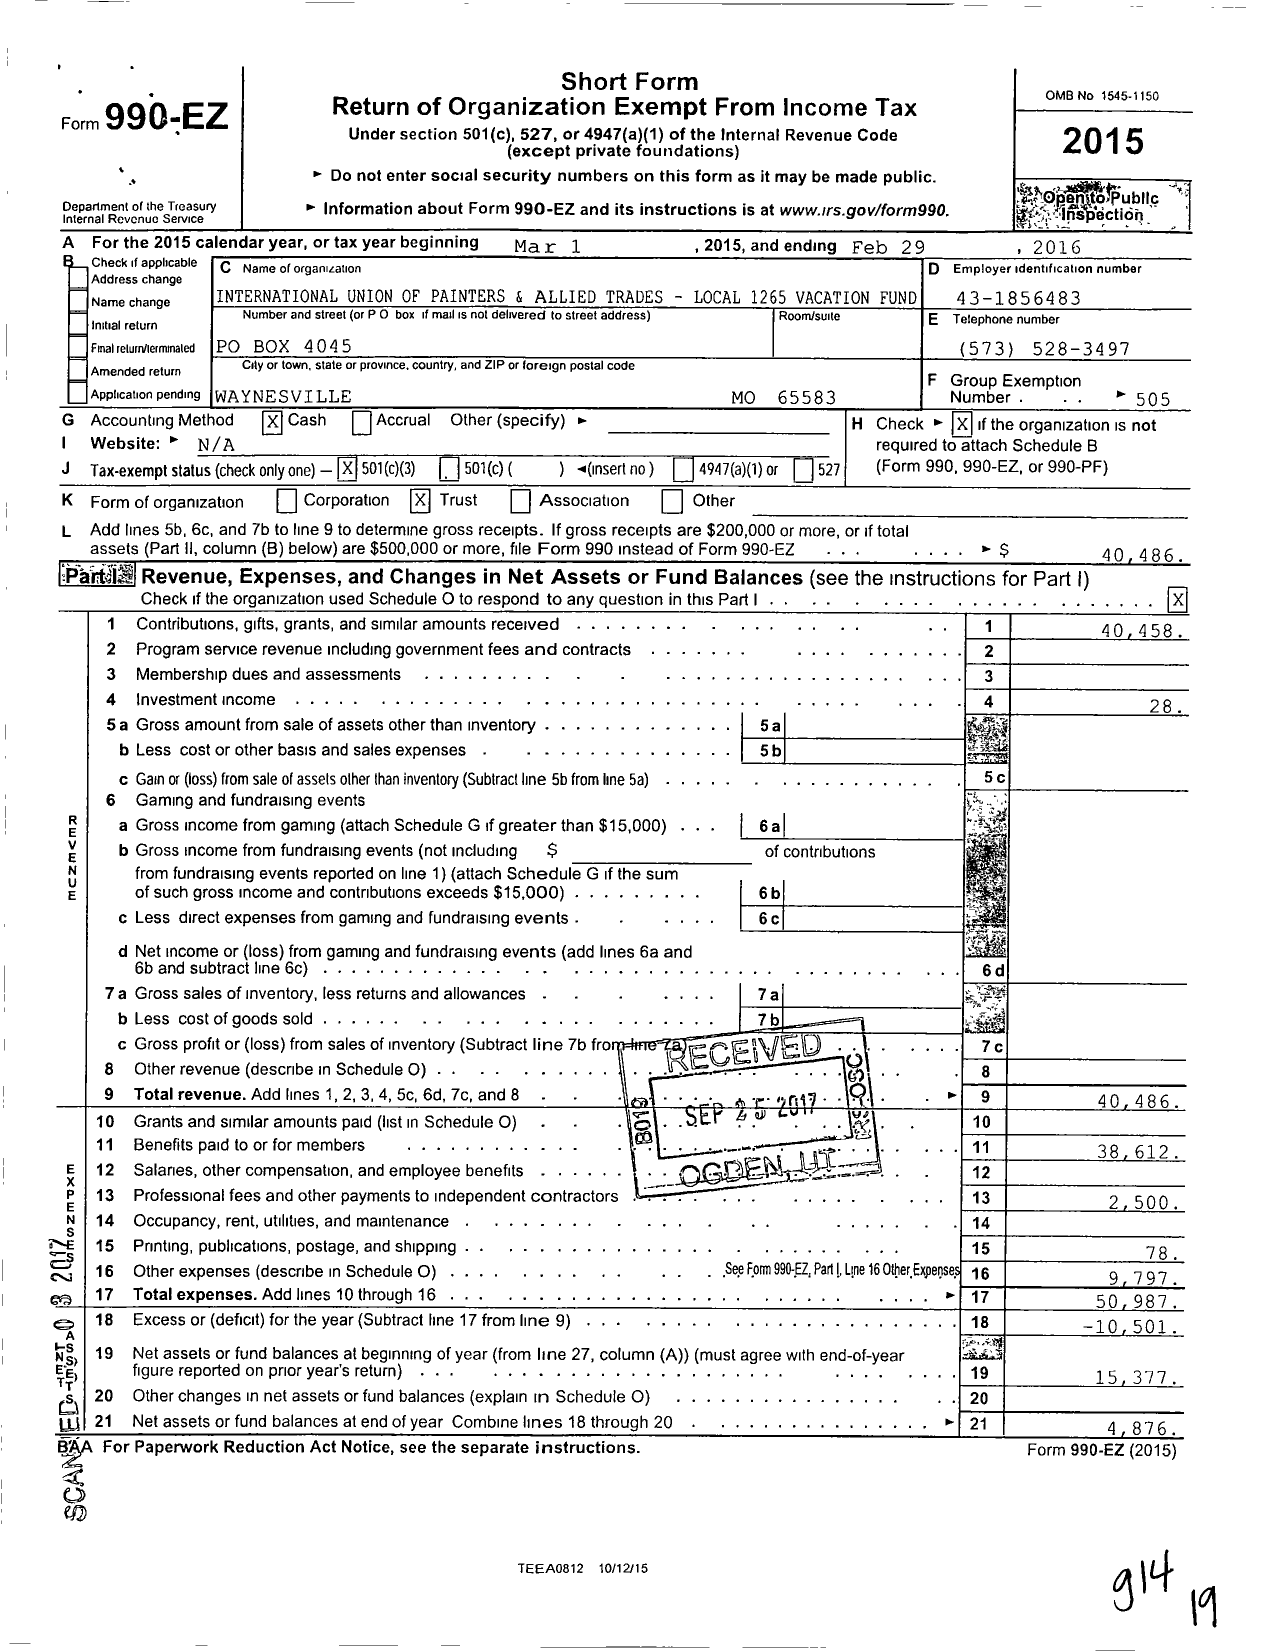 Image of first page of 2015 Form 990EZ for International Union of Painters and Allied Trades Local 1265 Vacation Fund